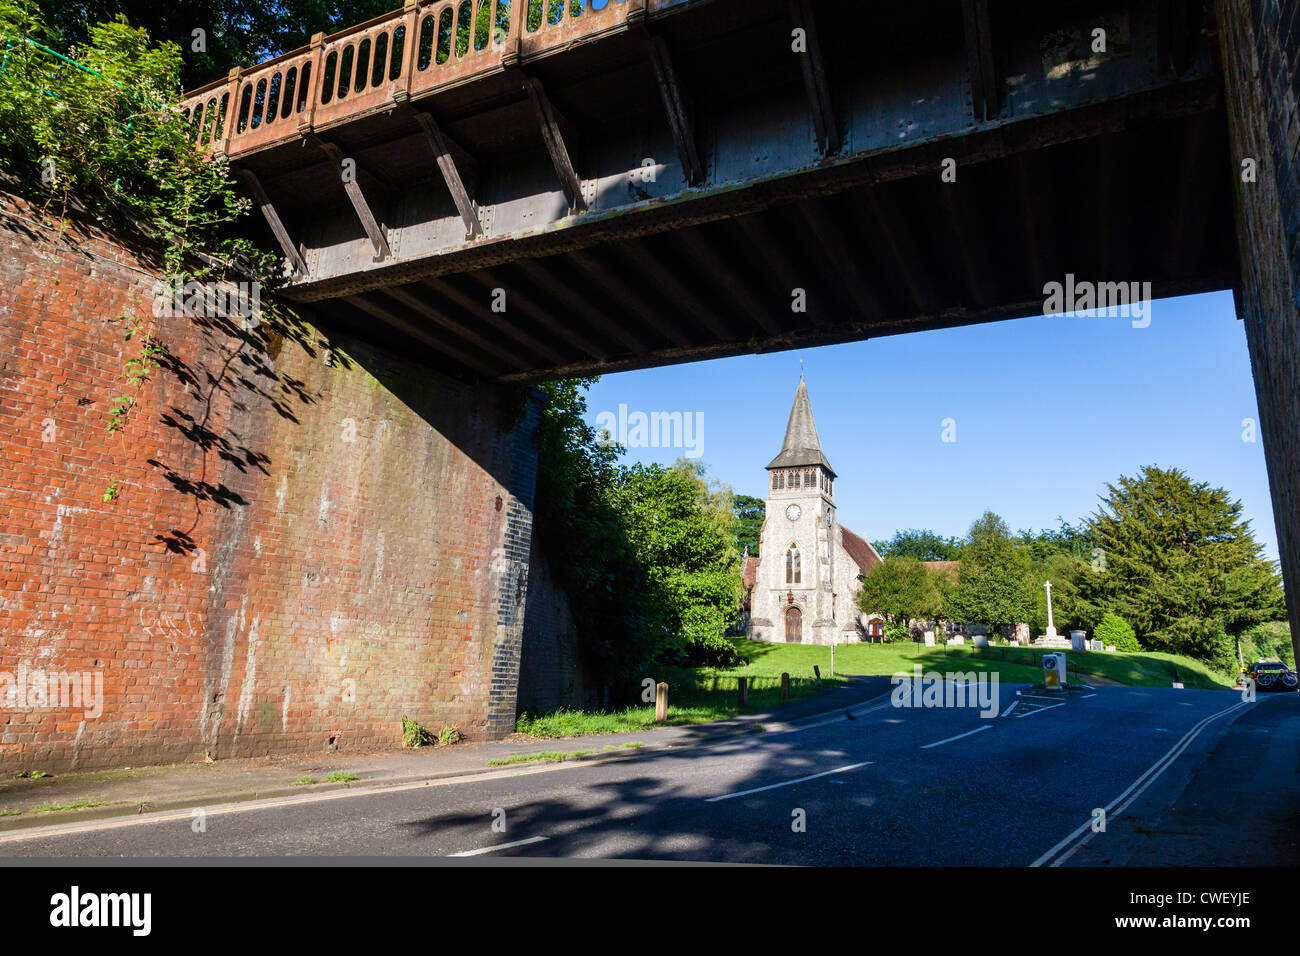 The Church of St Nicholas at Wickham, Hampshire, Seen from under a disused Railway bridge, UK Stock Photo